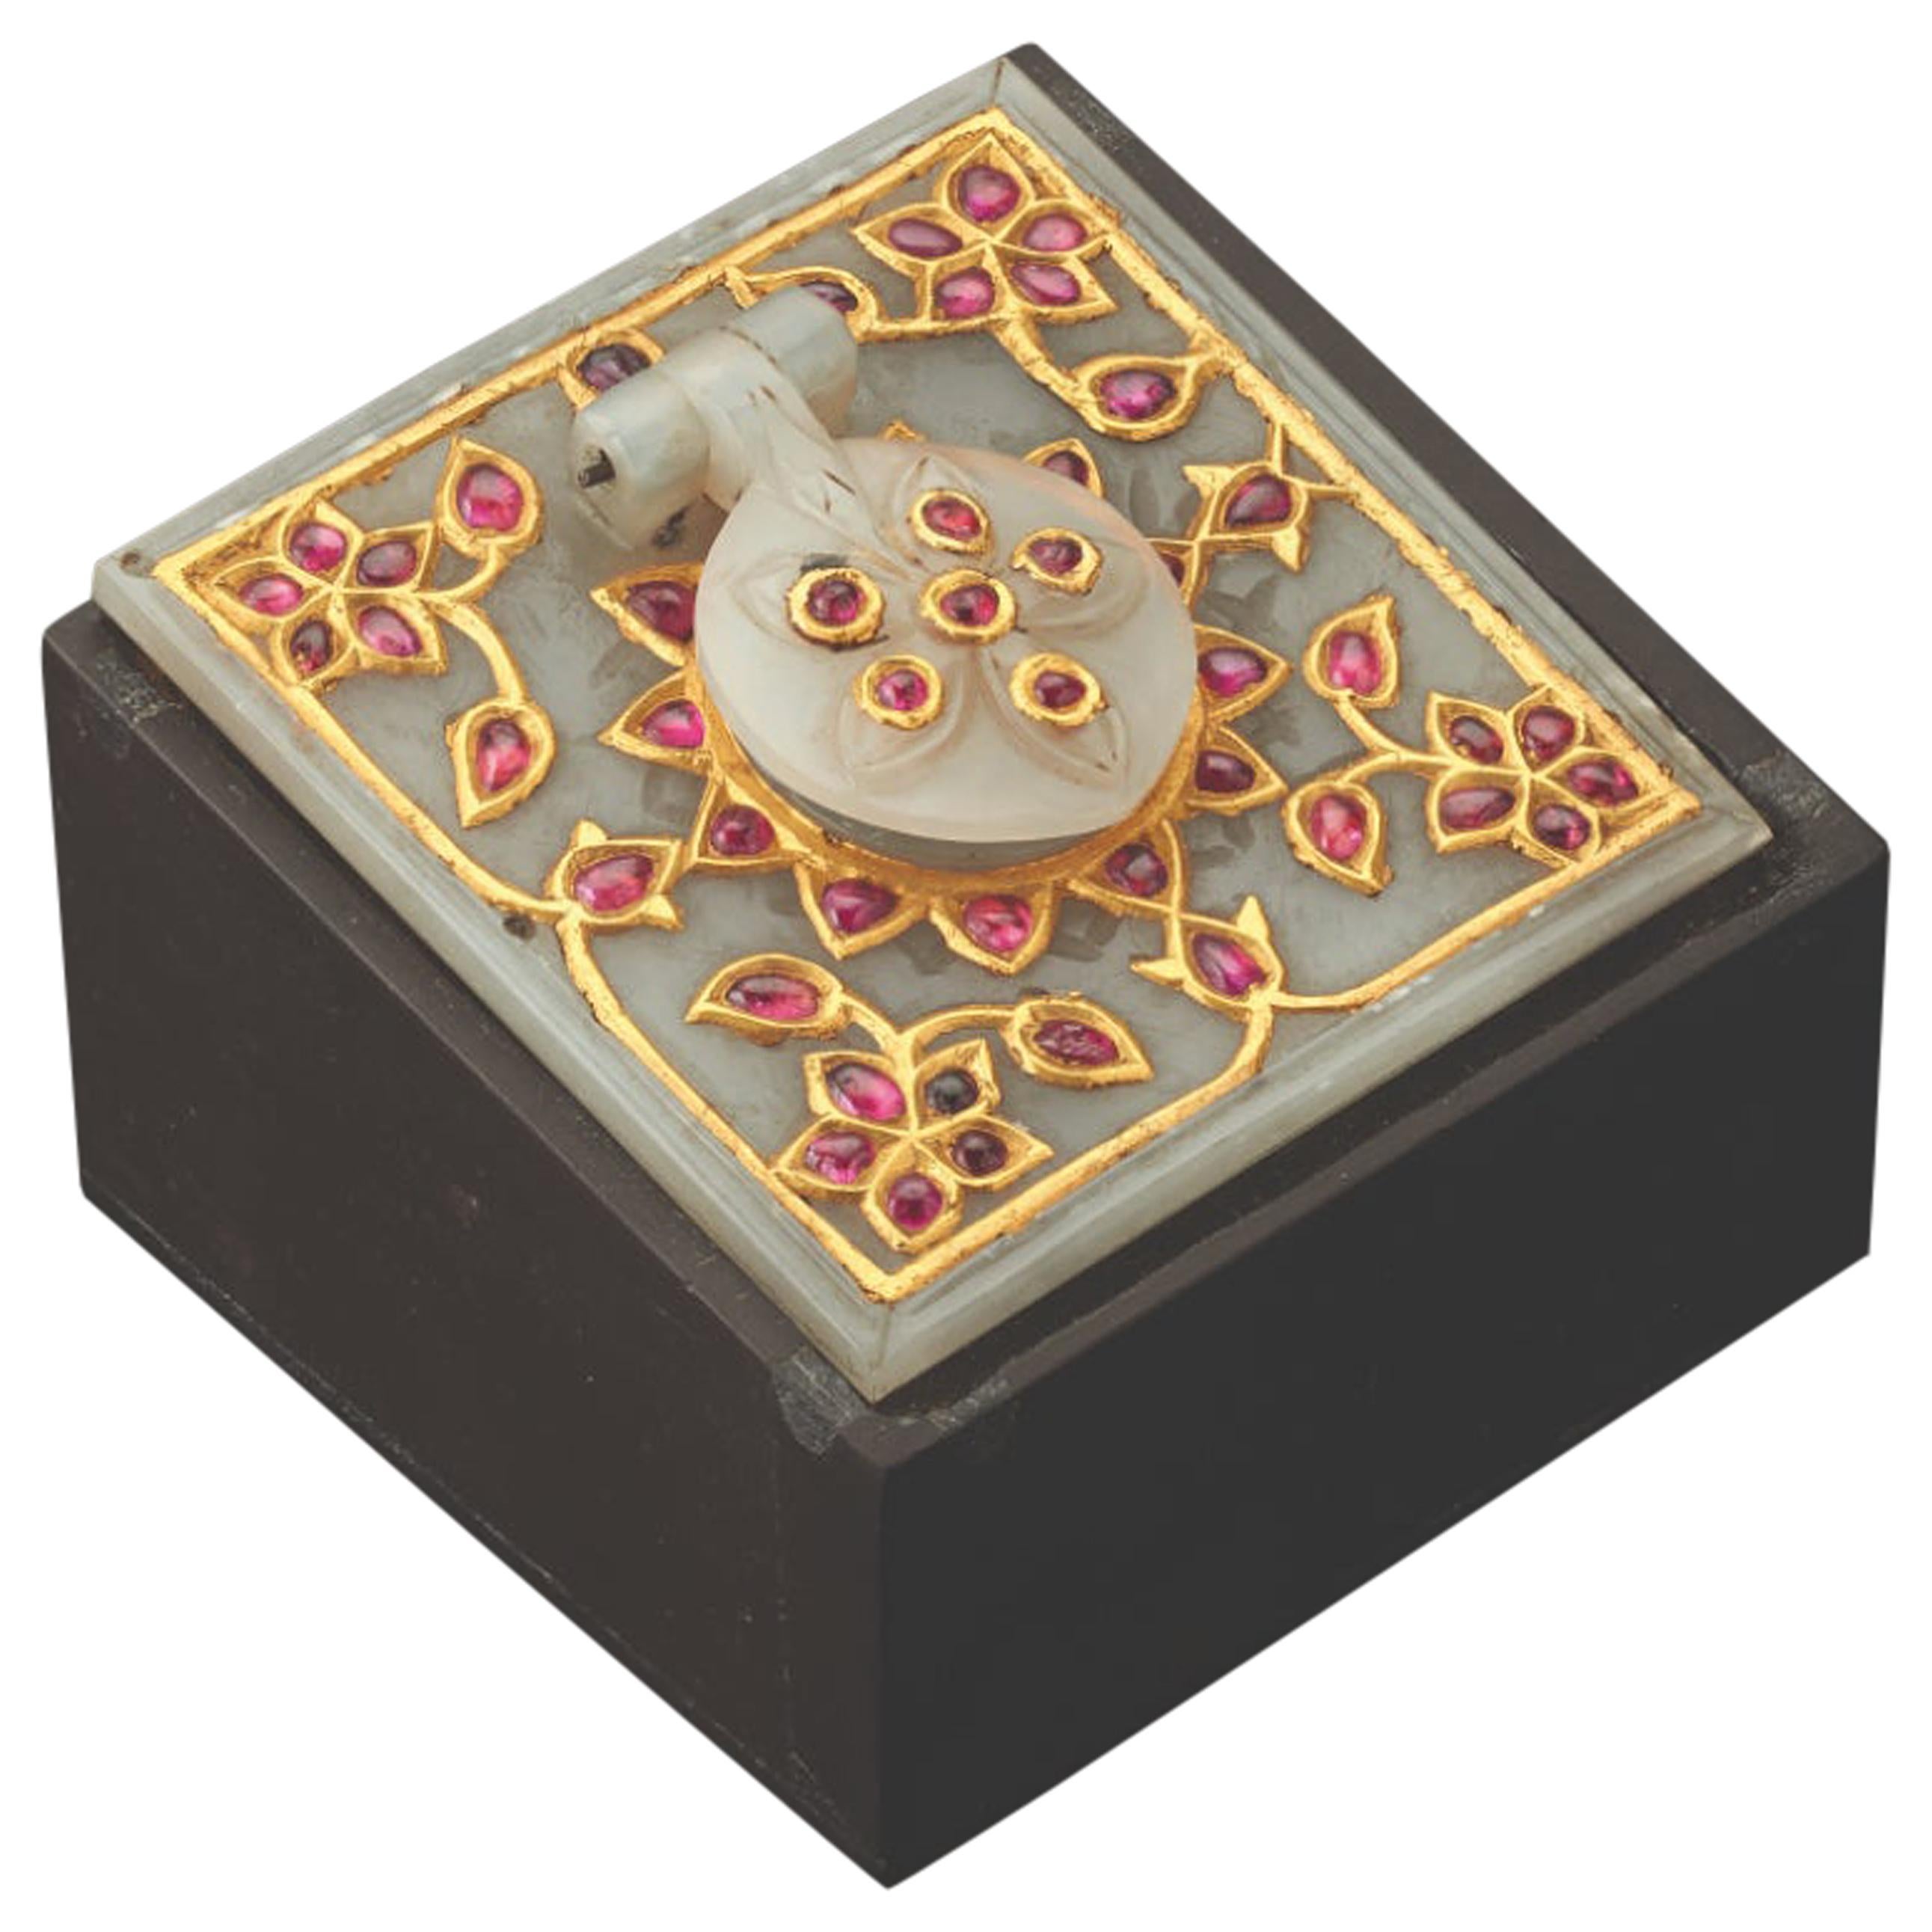 Al Thani Collection, a Mughal Indian Square White Jade Inkwell Cover, circa 1800